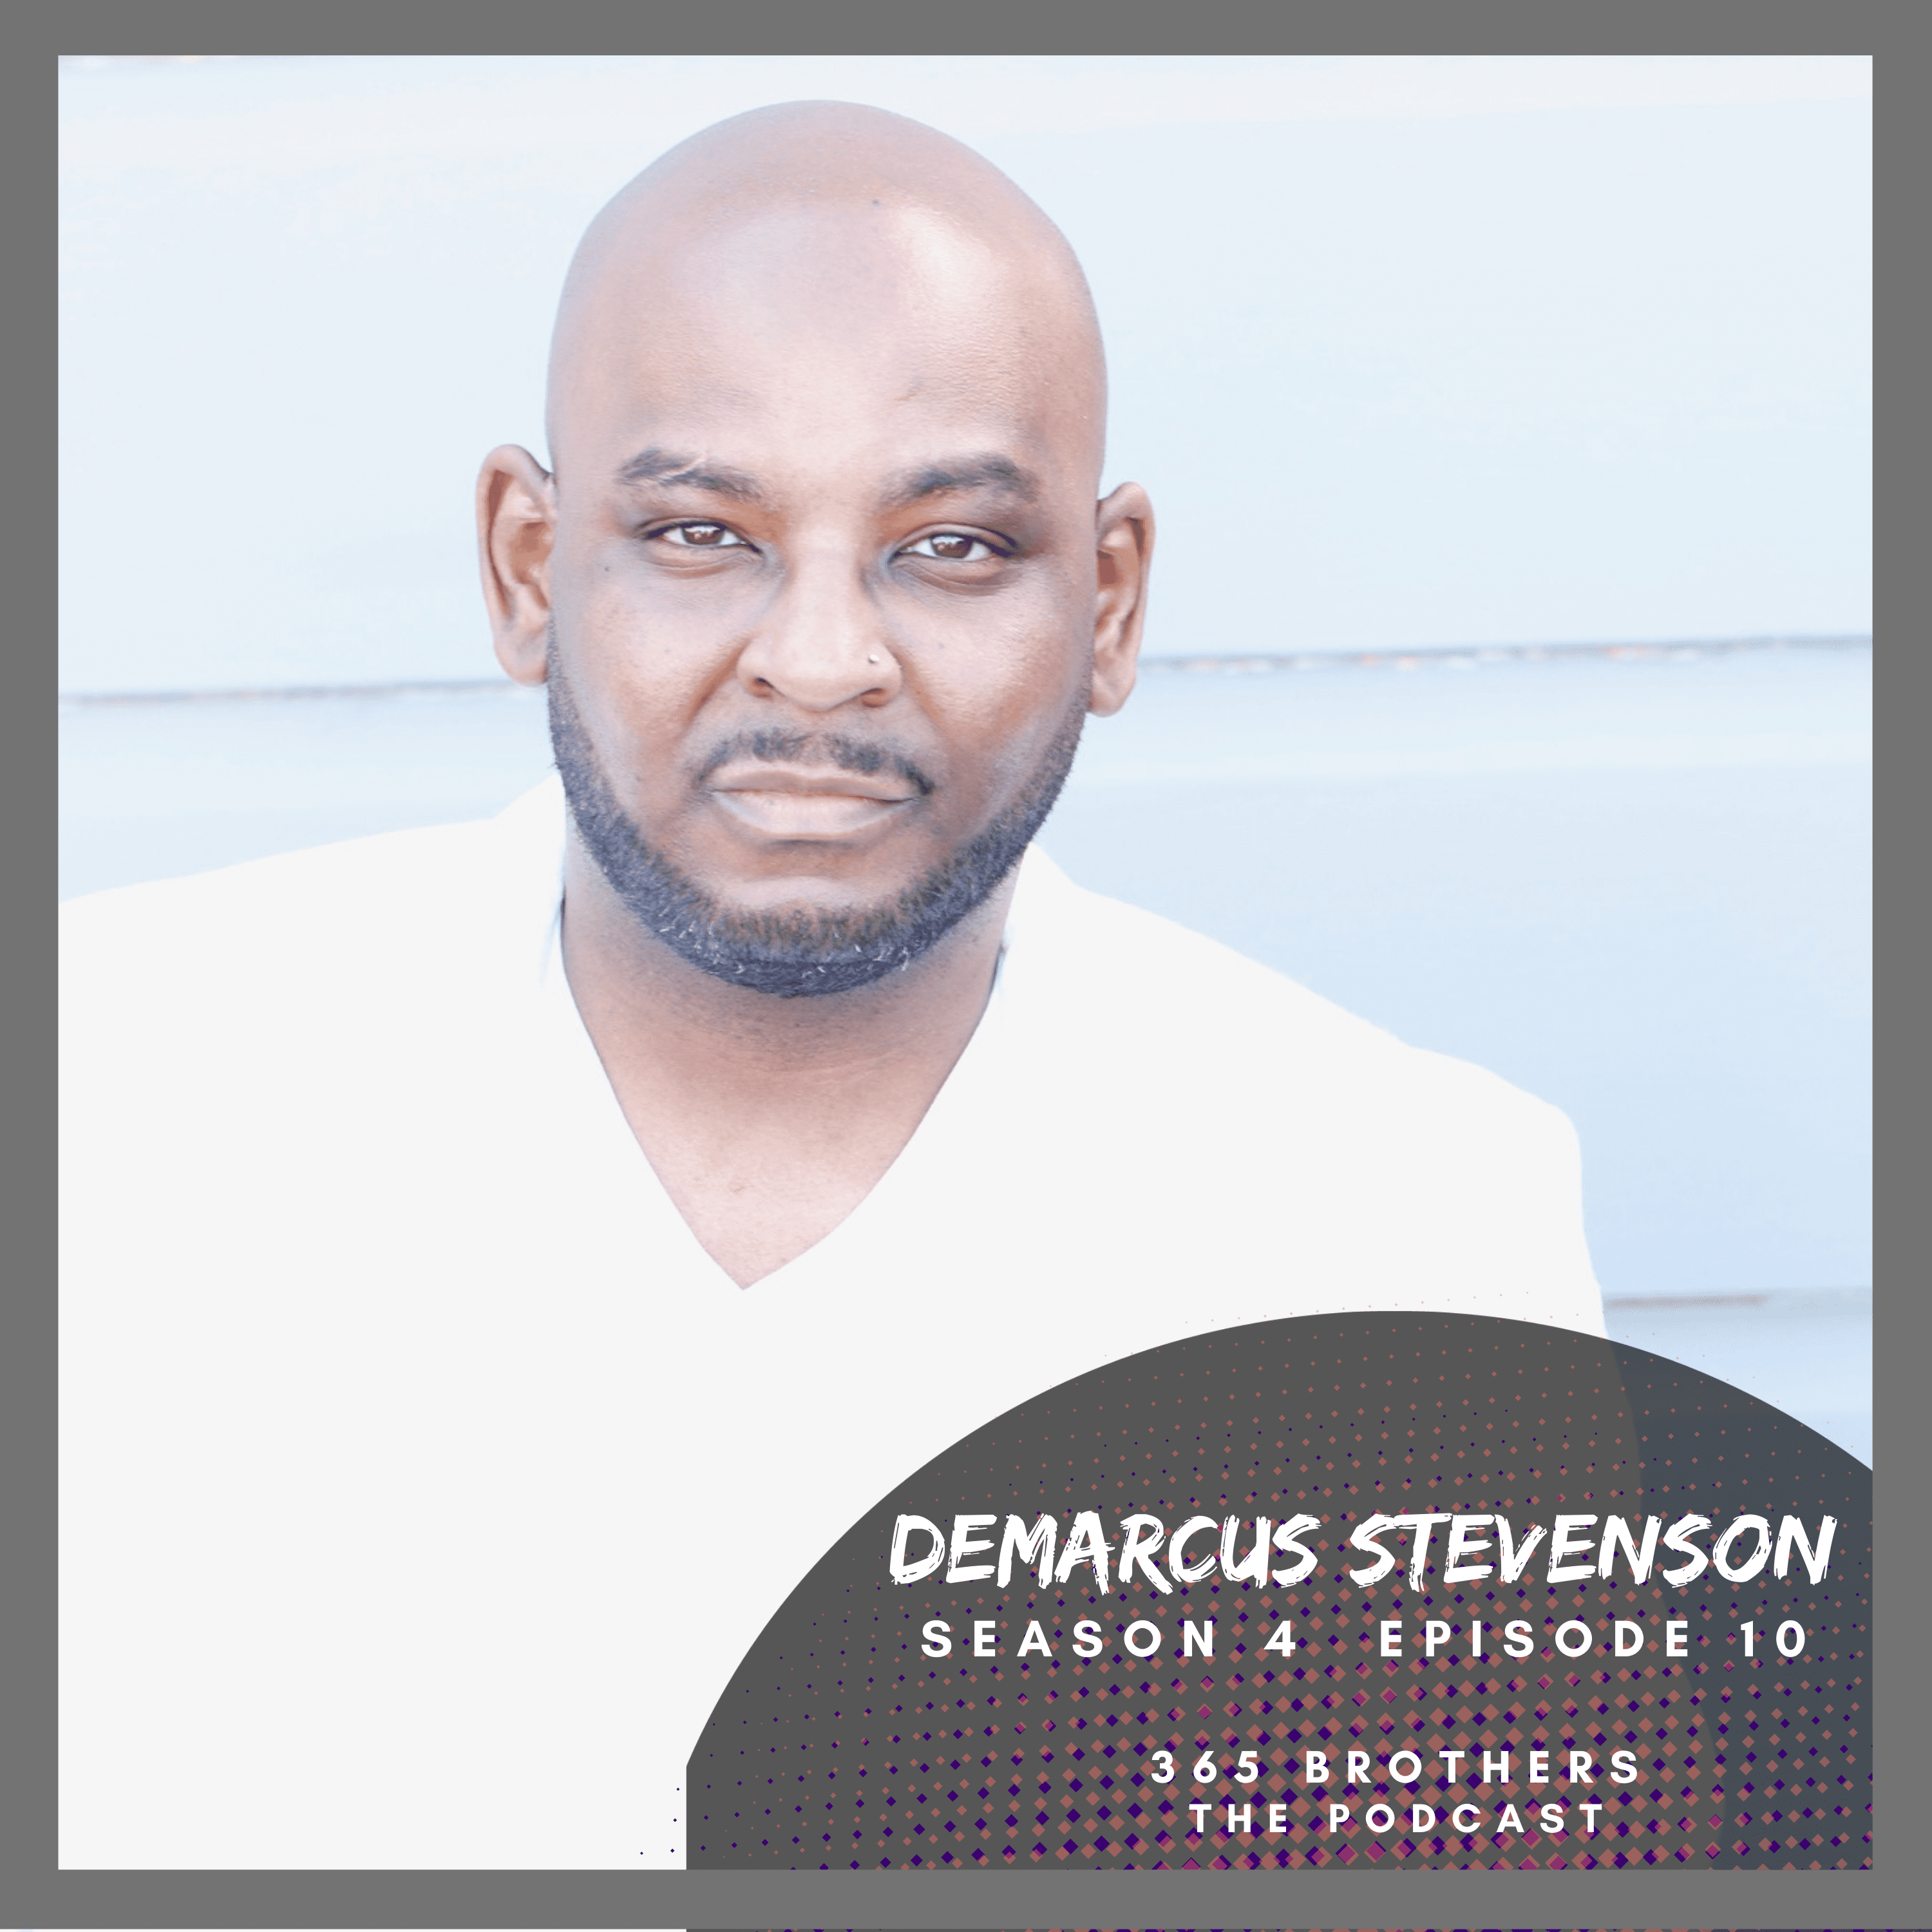 Black Podcasting - Where Are All The Black Male Nurses? Doctor of Nursing Practice Candidate, Demarcus Stevenson Tells Us